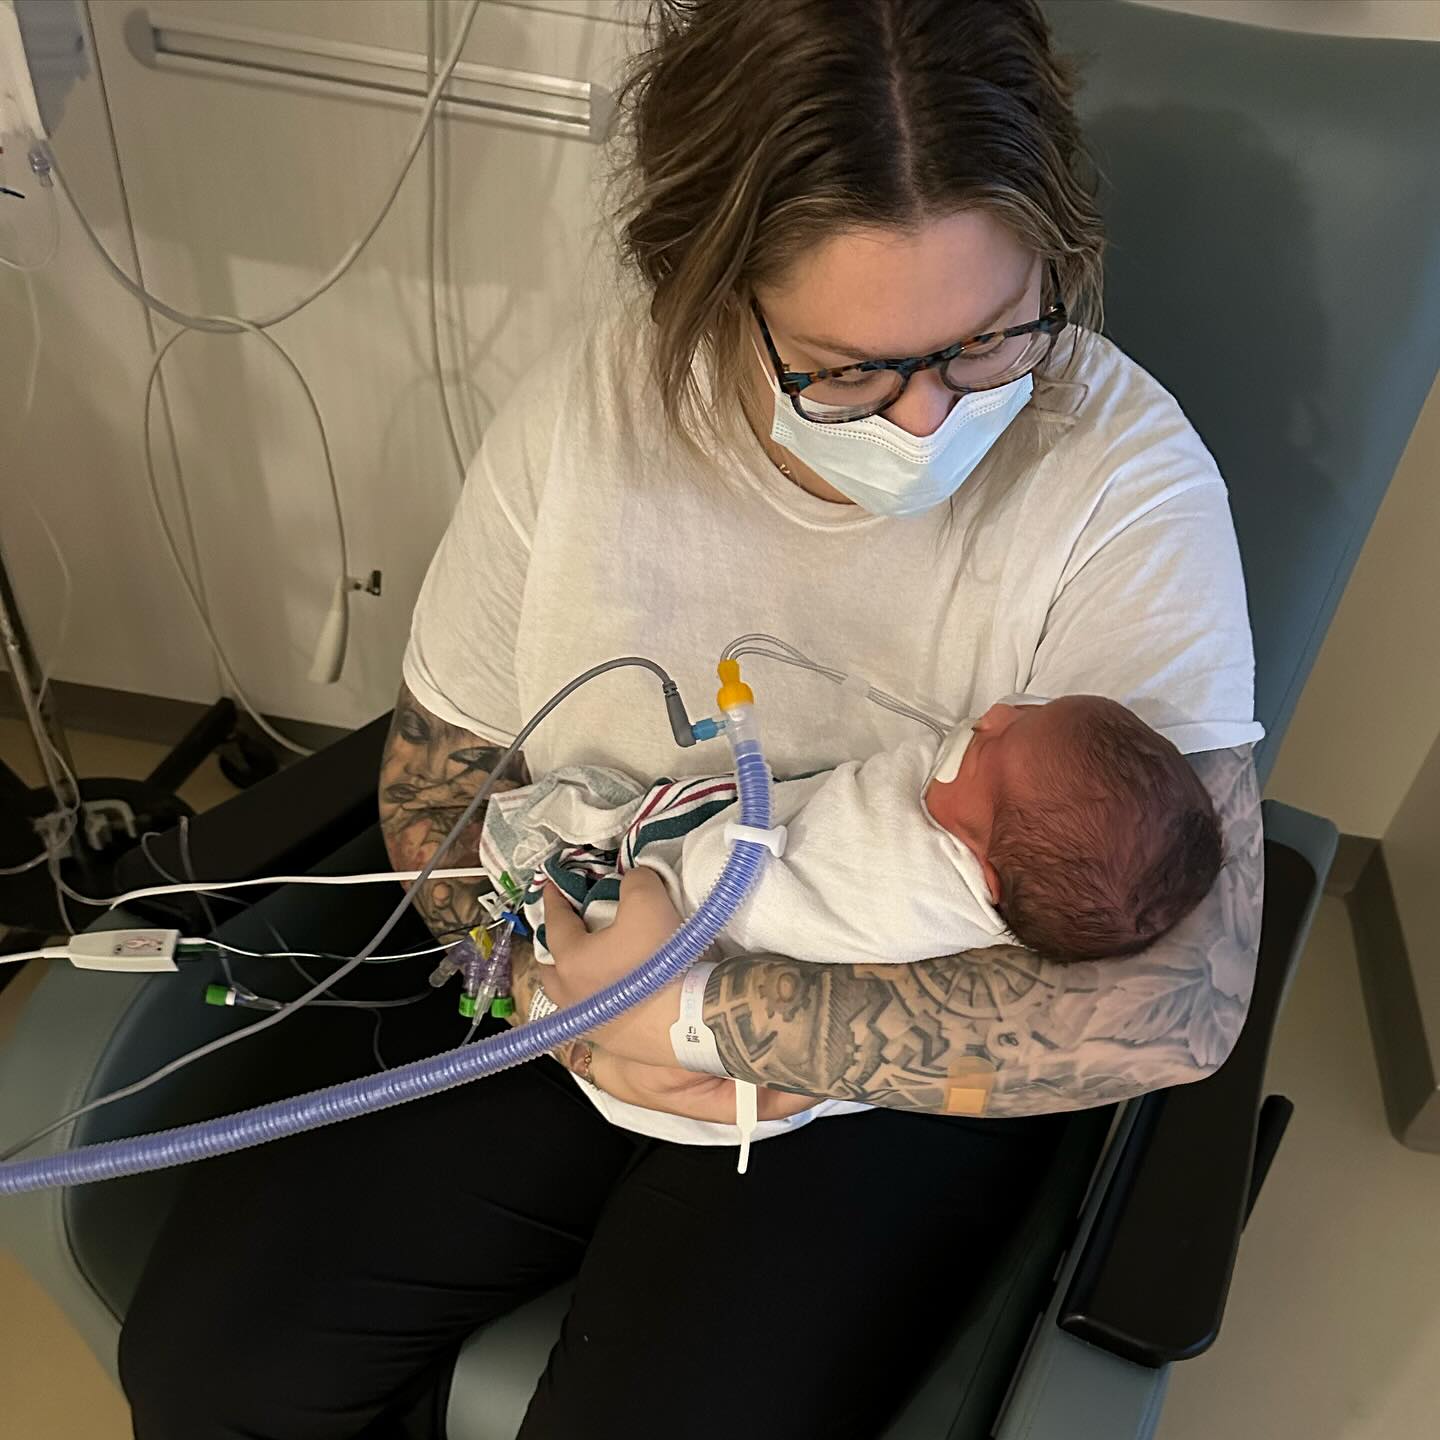 Kailyn has been open about her daughter Valley's struggles in the NICU after her birth